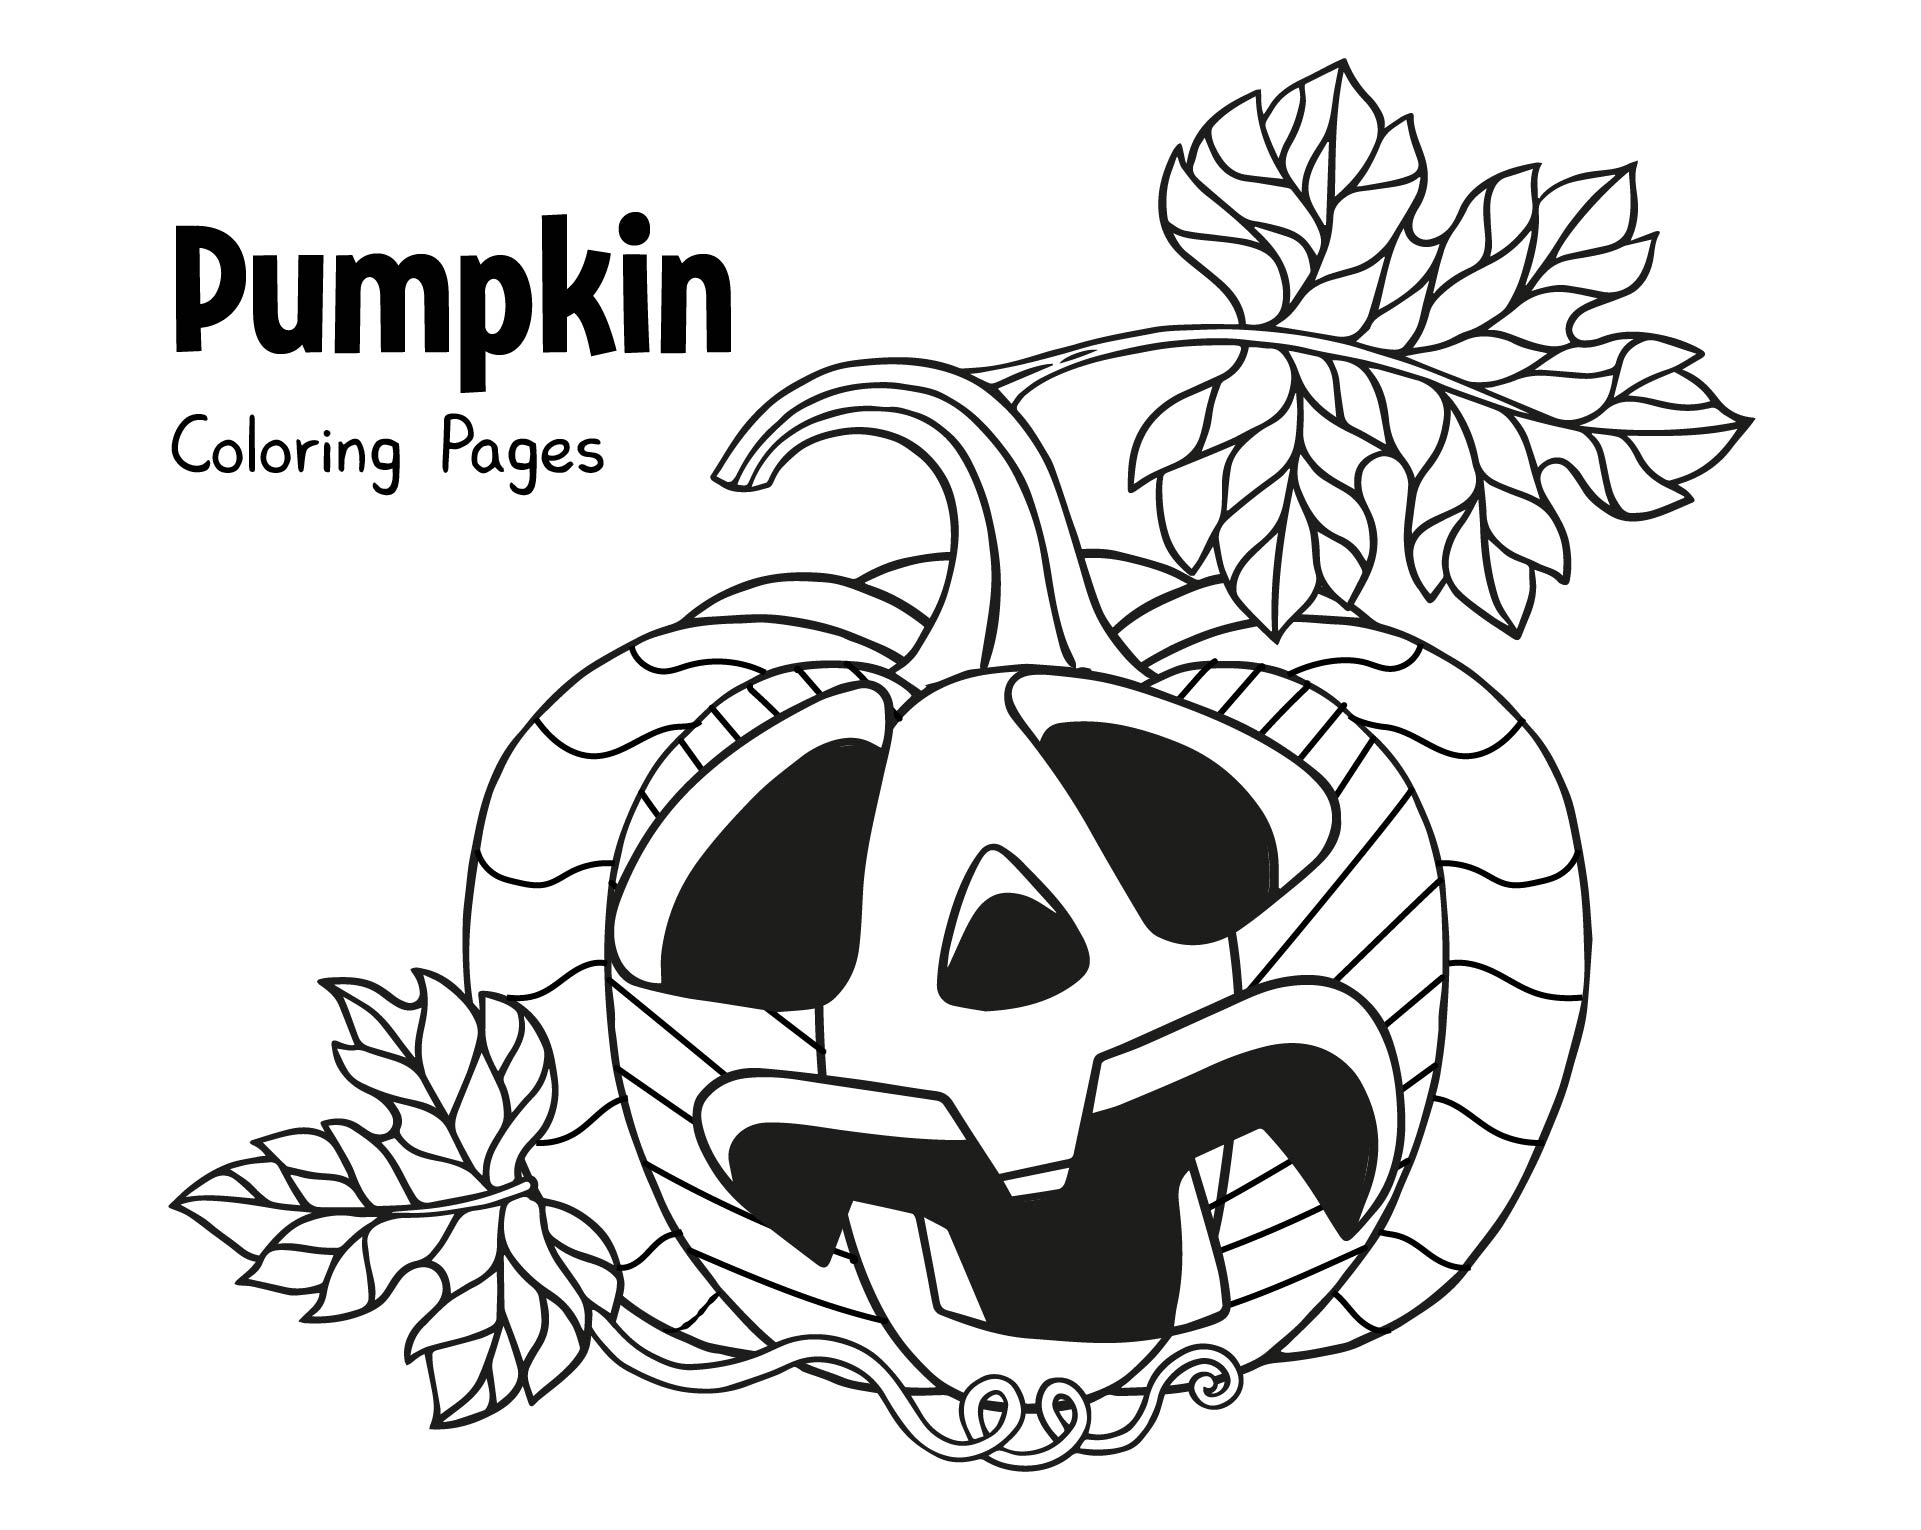 Pumpkin Coloring Pages For Adults & Kids